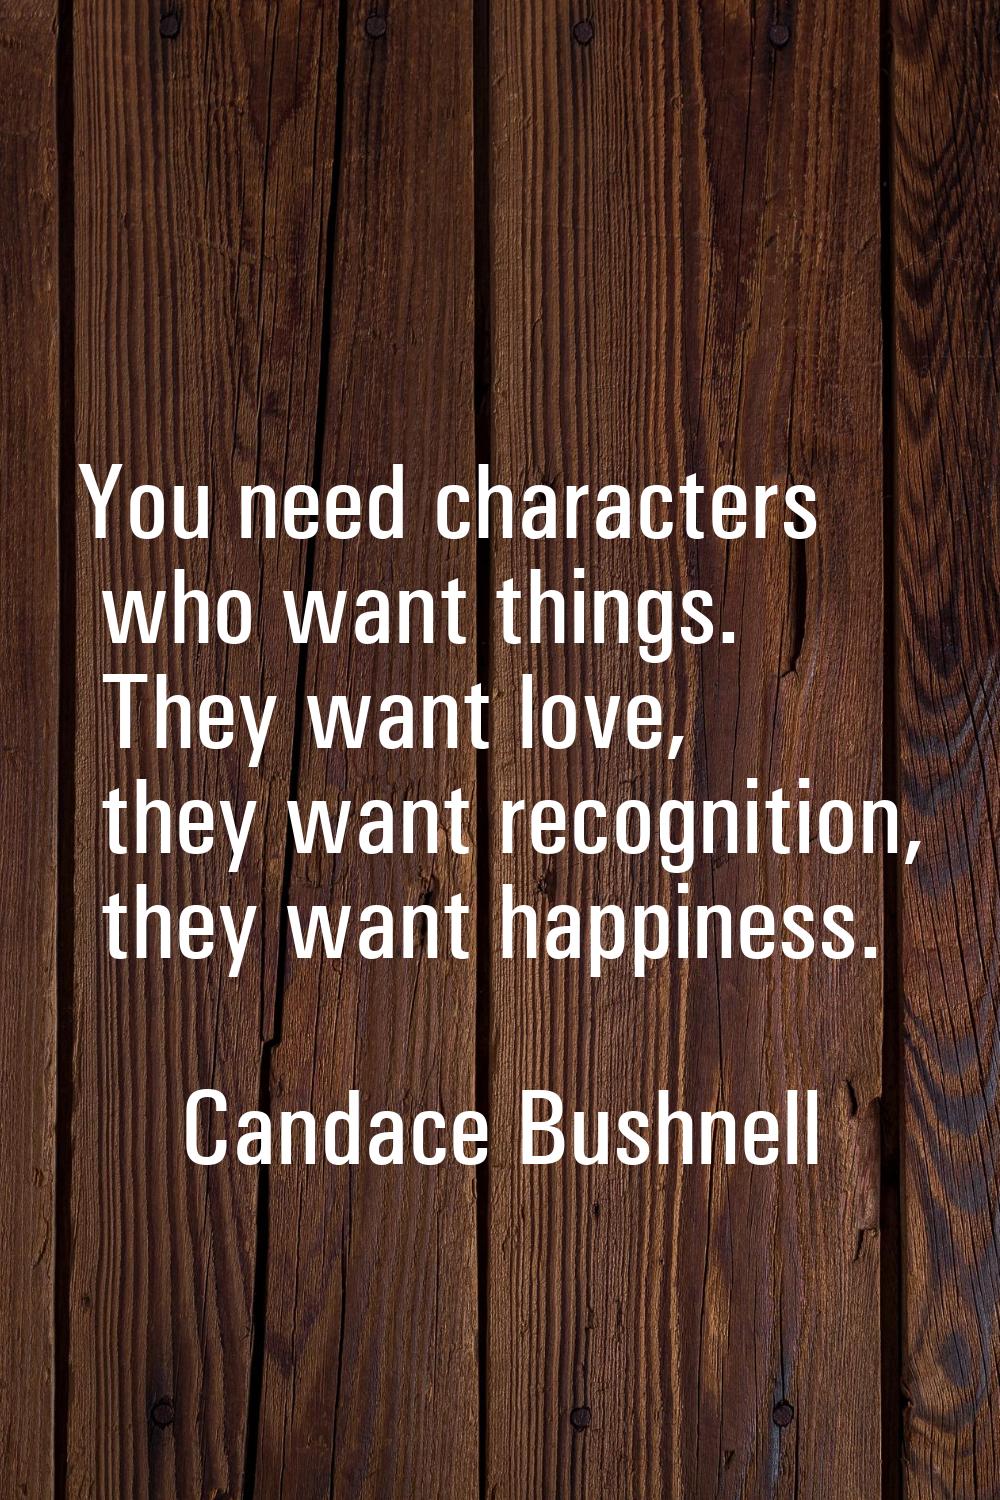 You need characters who want things. They want love, they want recognition, they want happiness.